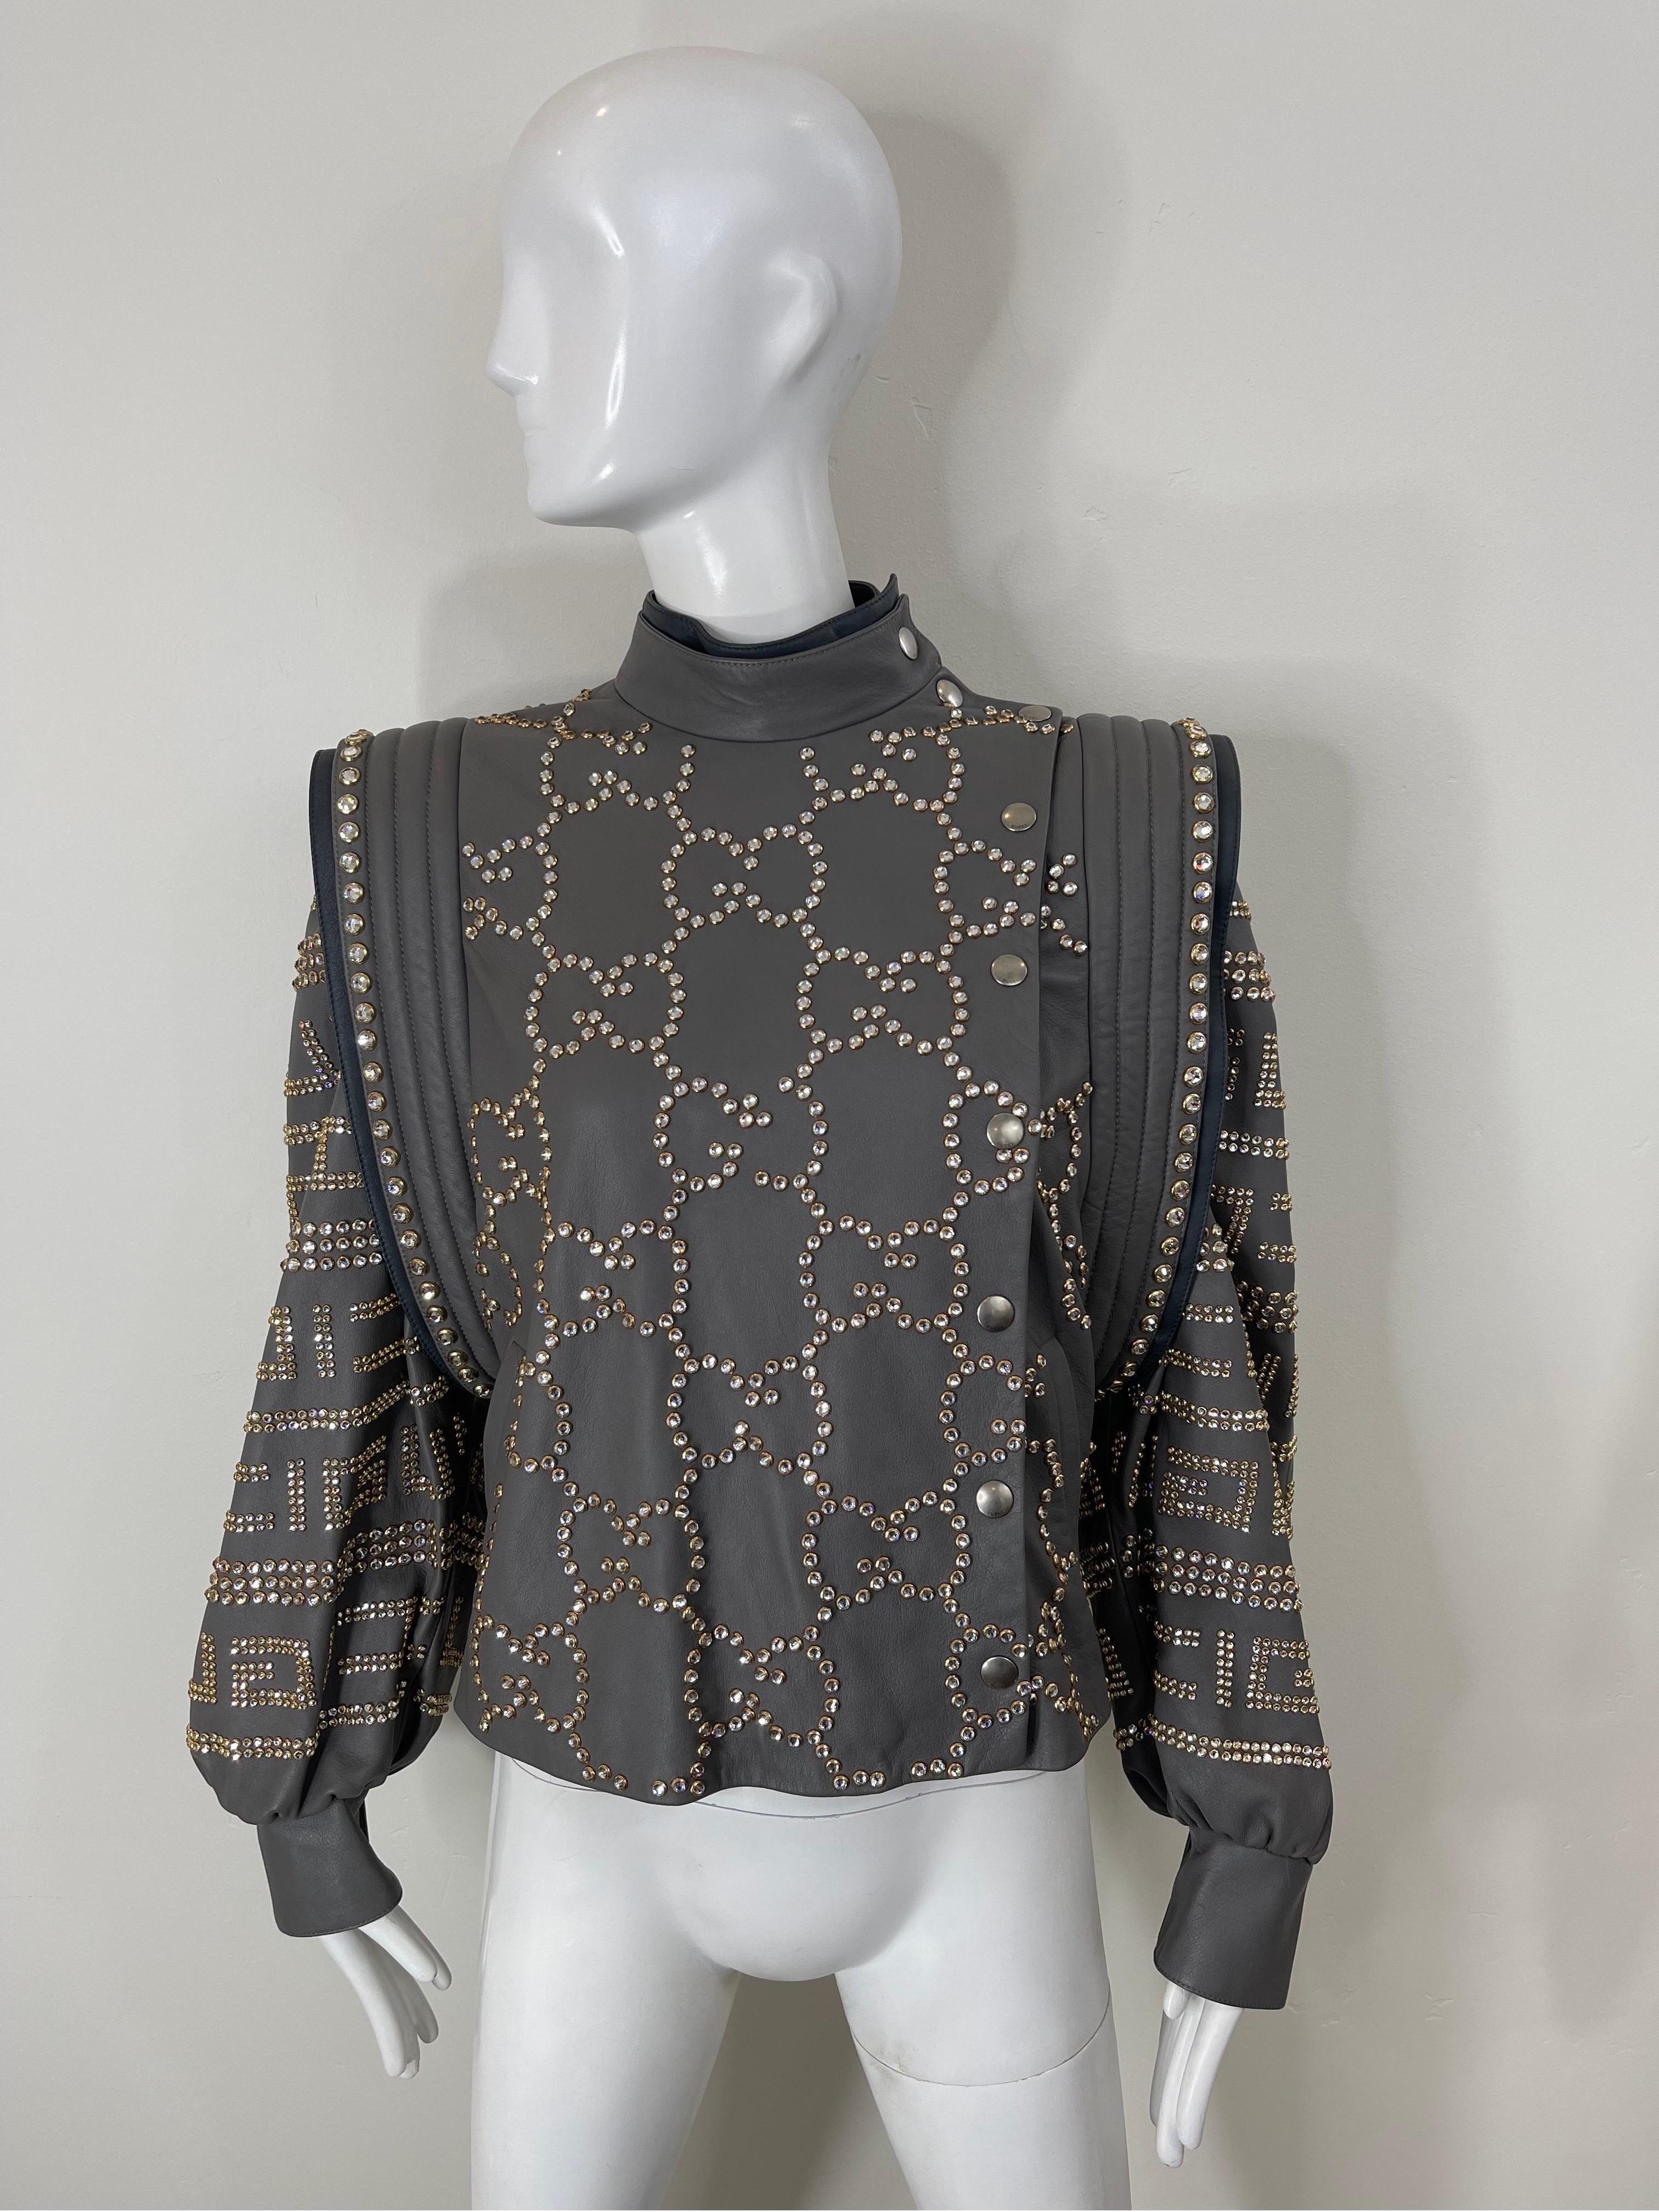 NWT GUCCI F/W 2018 Runway Gray Sz 40 Leather Studded Rhinestone Jacket or Vest In New Condition For Sale In San Diego, CA